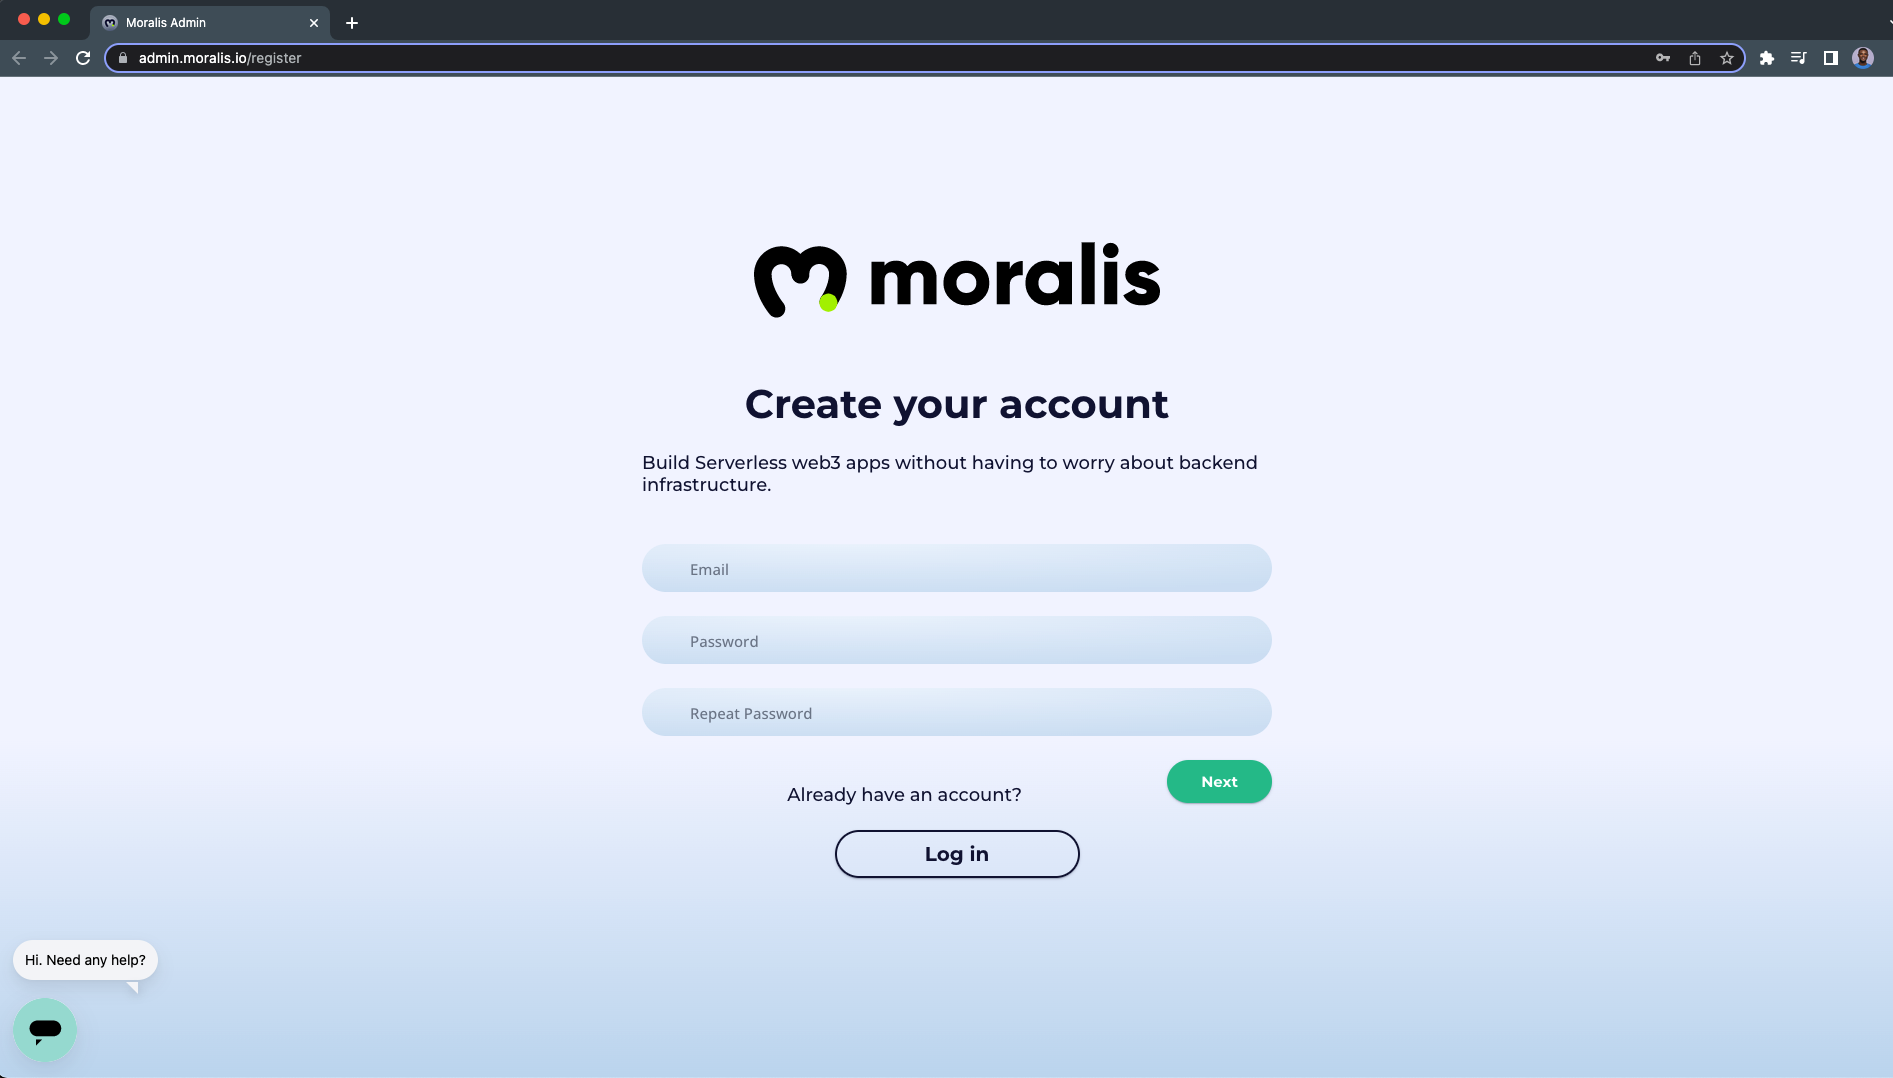 Moralis registration page - creating a Moralis account and confirm your email address